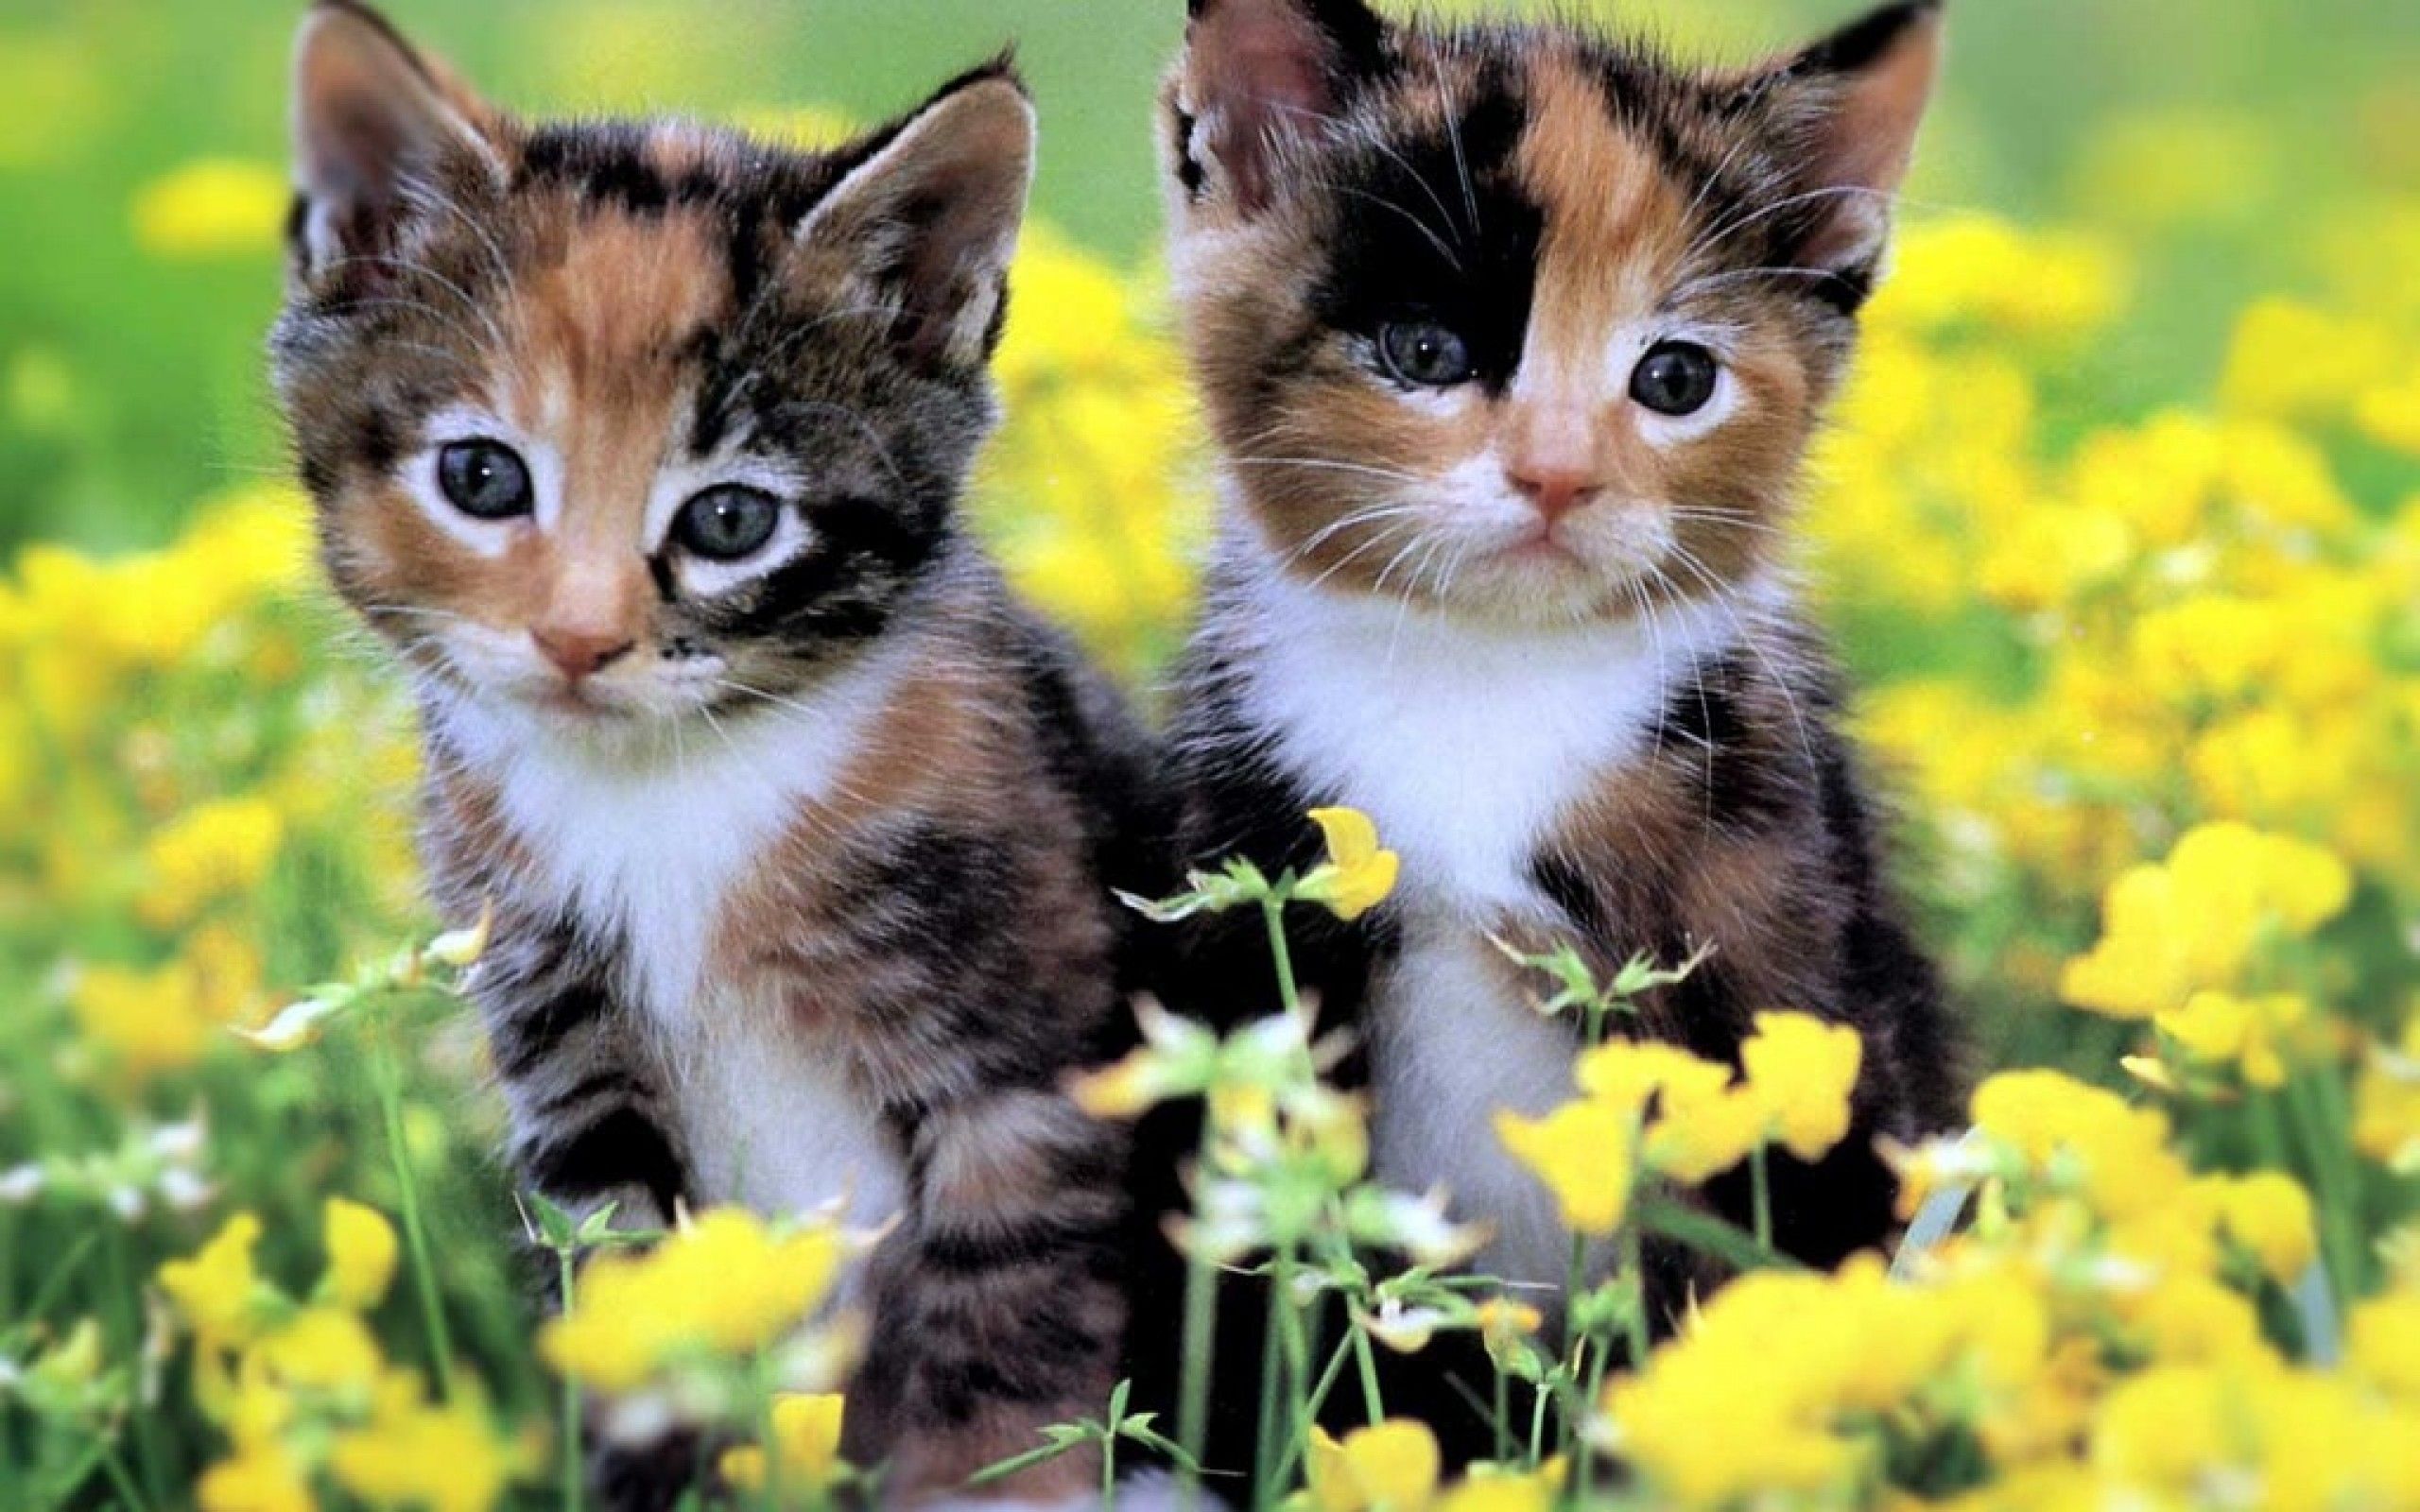 Cute Cats and Kittens Wallpaper Free Cute Cats and Kittens Background